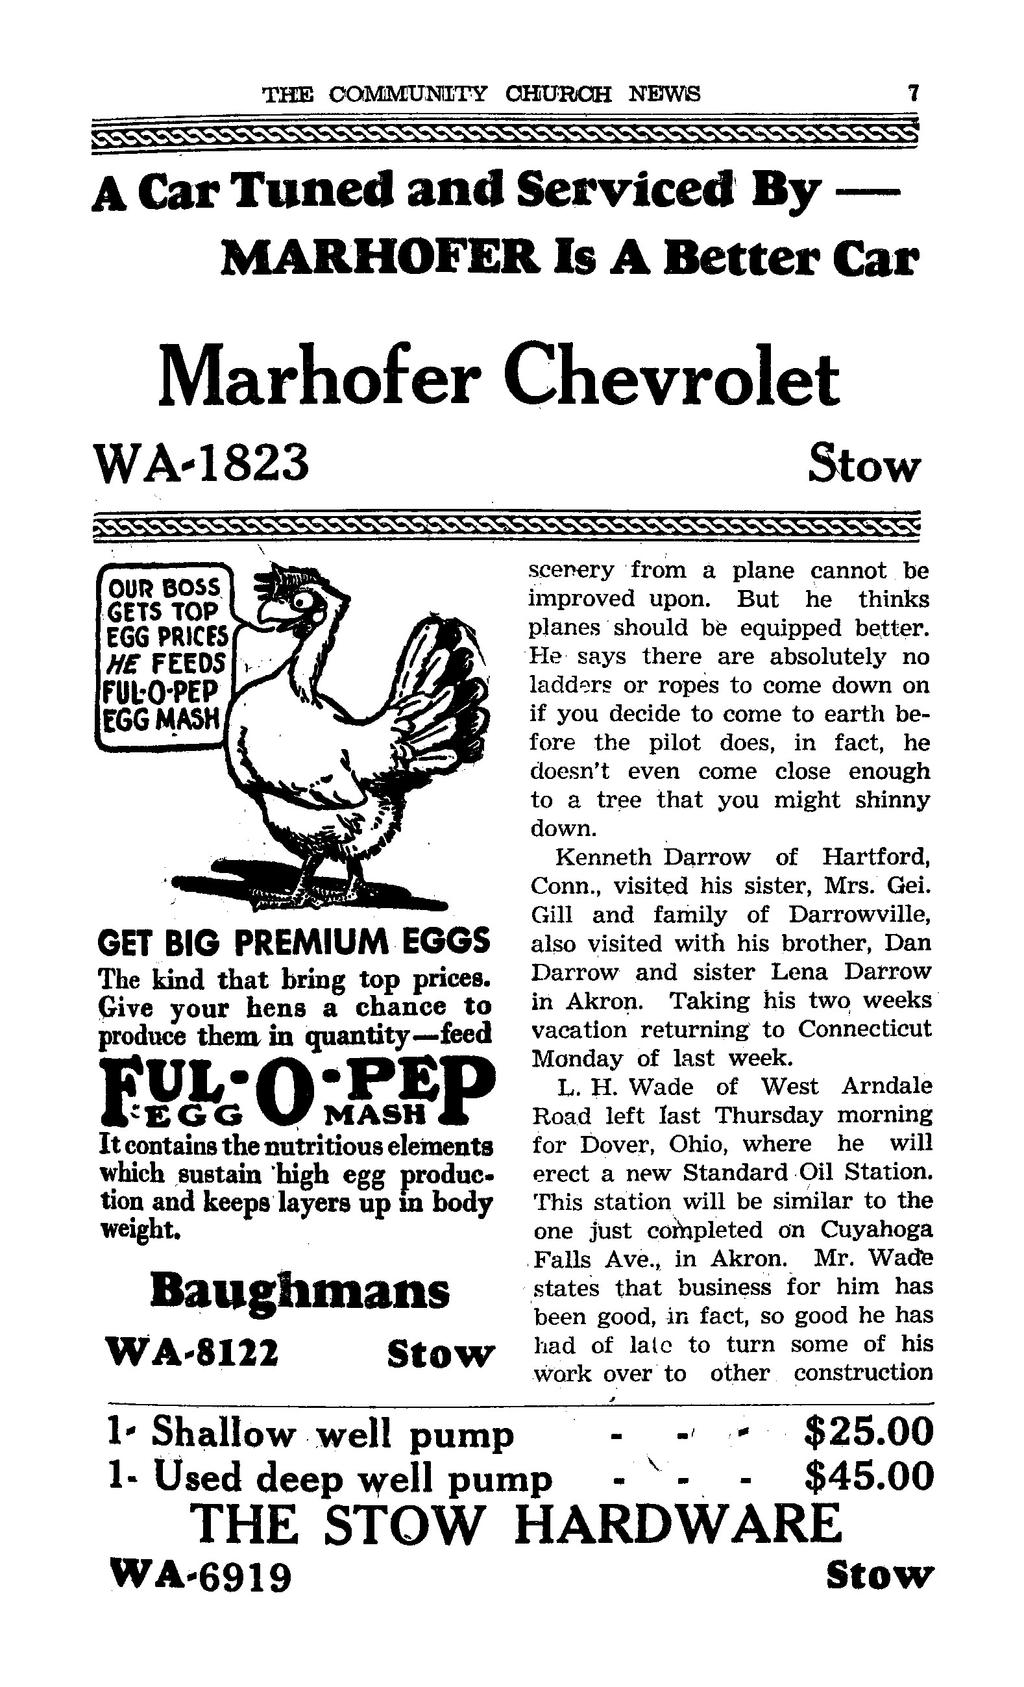 THE COMMUiN'ITY CHURCH NEWS 7 A Car Tuned and Serviced By MARHOFER Is A Better Car Marhofer Chevrolet WA-1823 Stow OUR BOSS GETS TOP EGG PRICES ME FEEDS FULOPEP EGGMASH GET BIG PREMIUM EGGS The kind